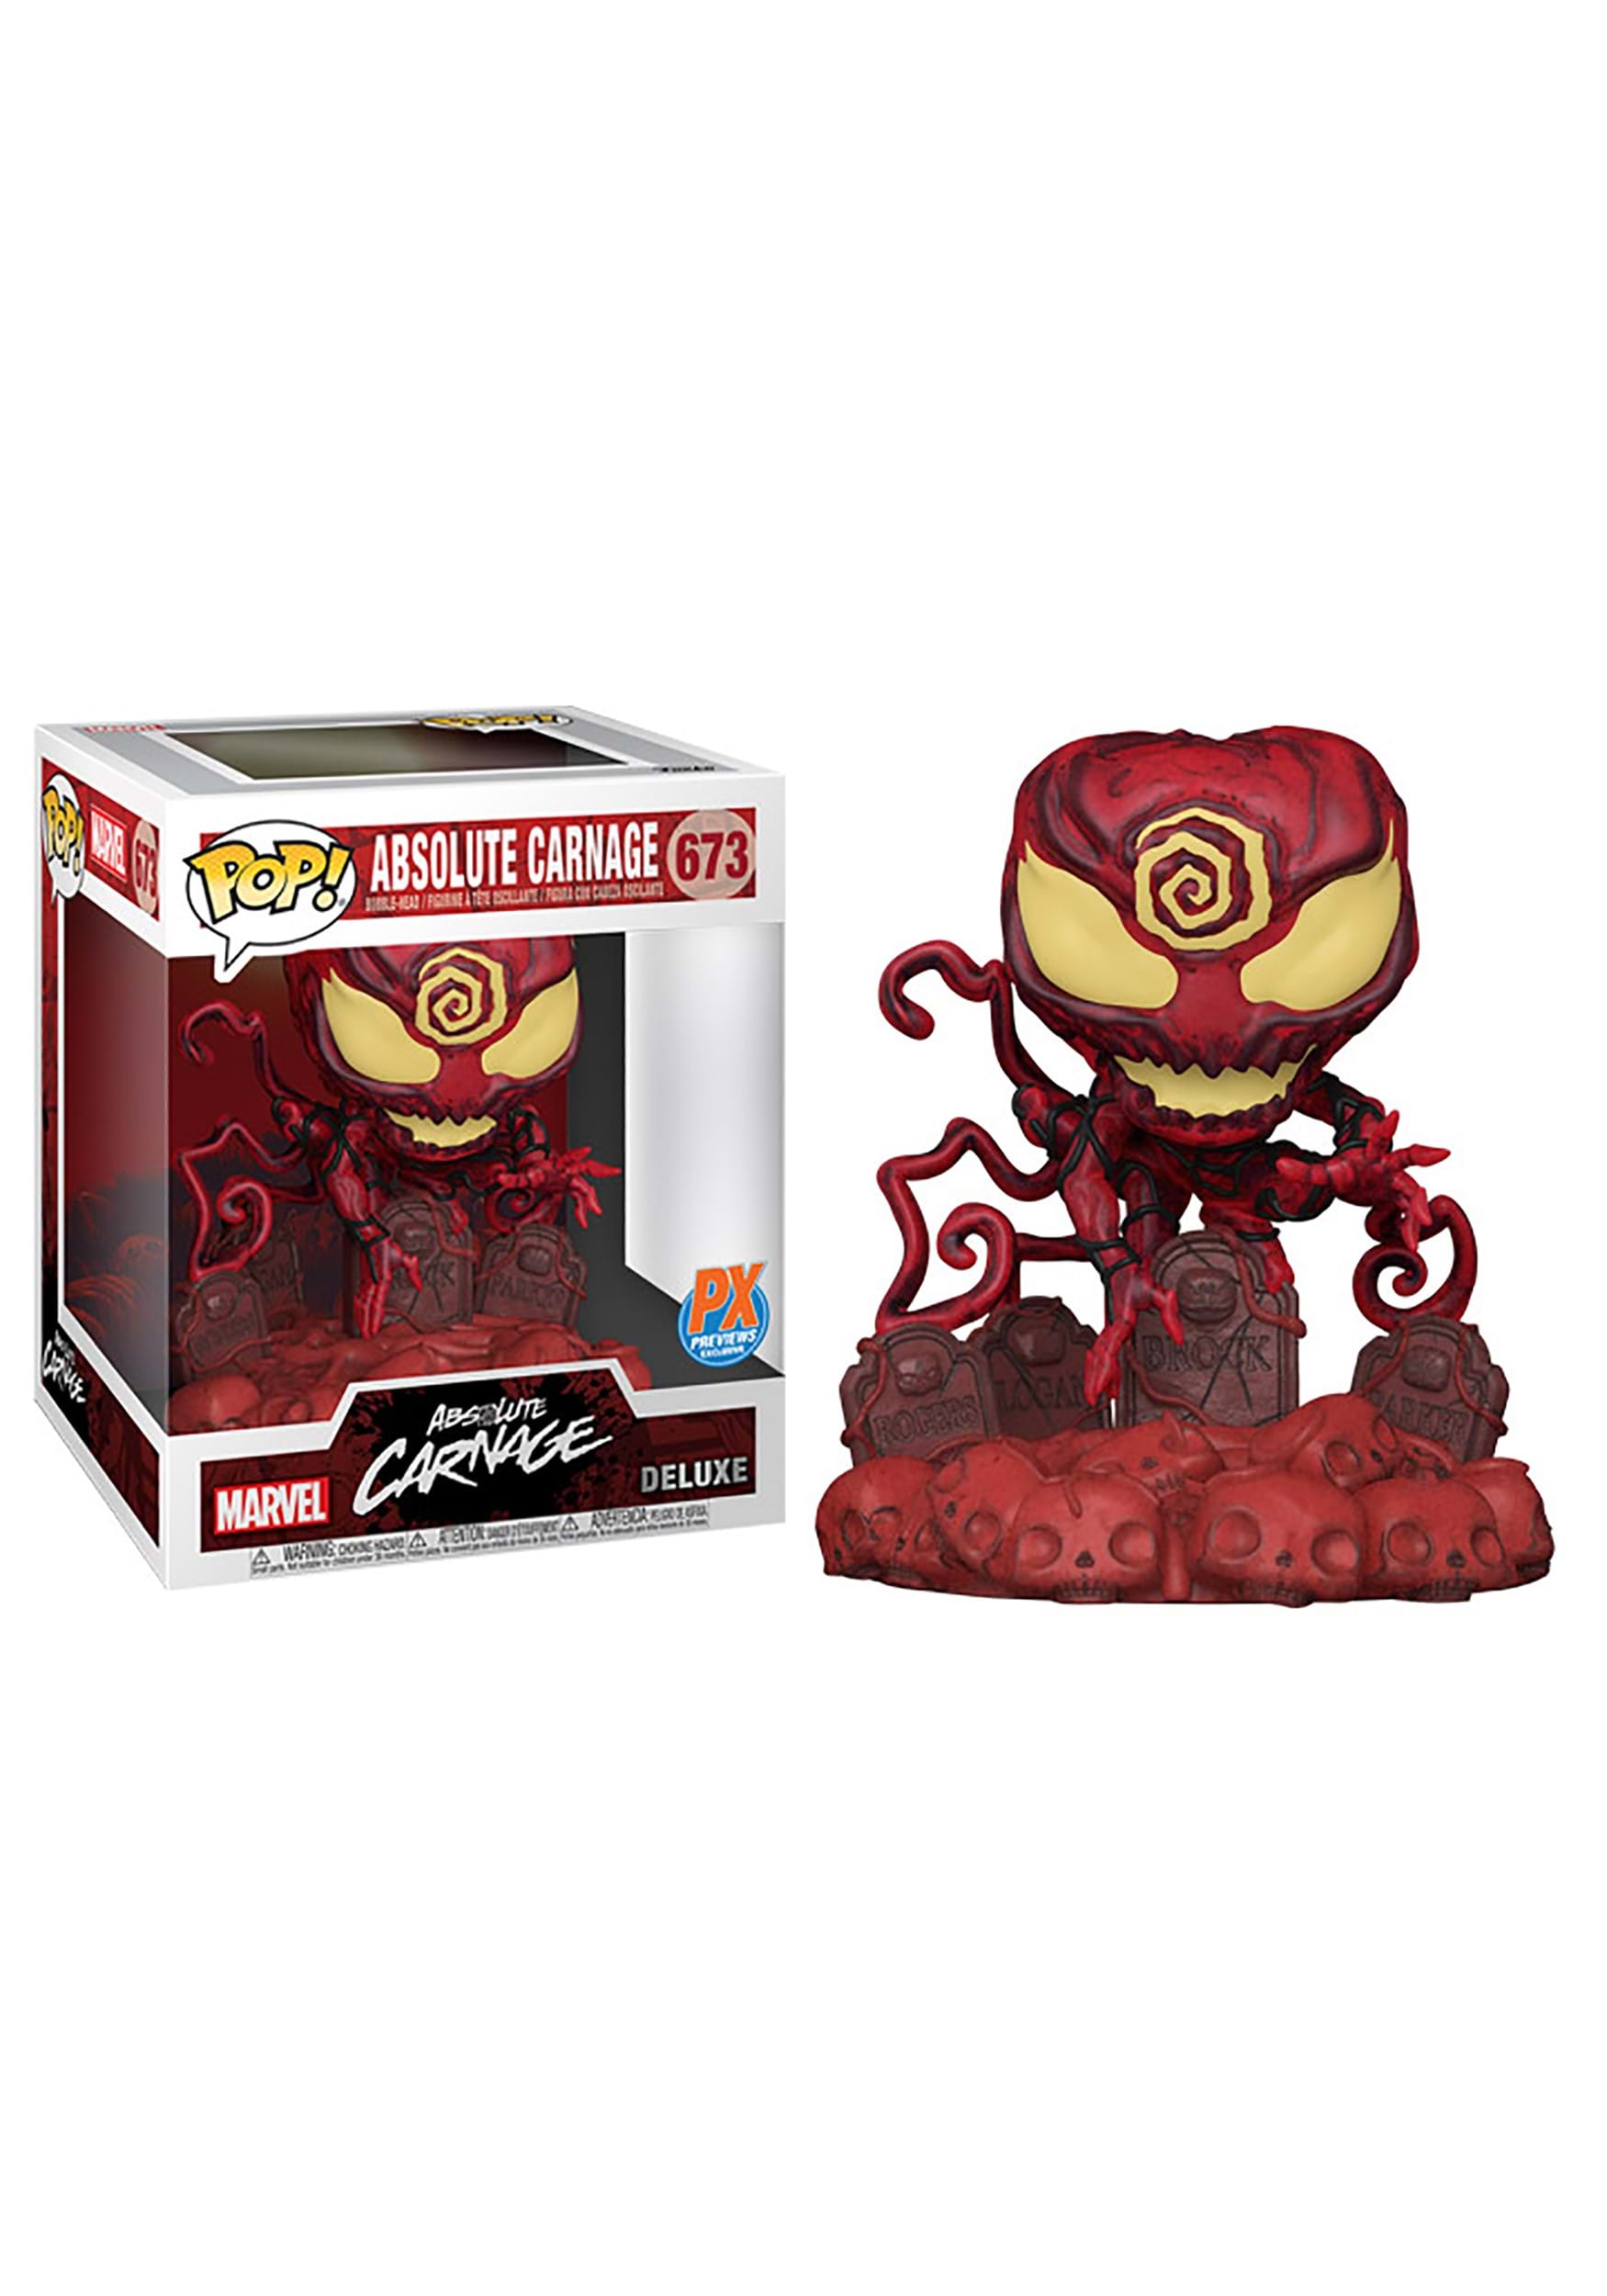 POP! Marvel Heroes Absolute Carnage PX Deluxe Bobblehead Figure